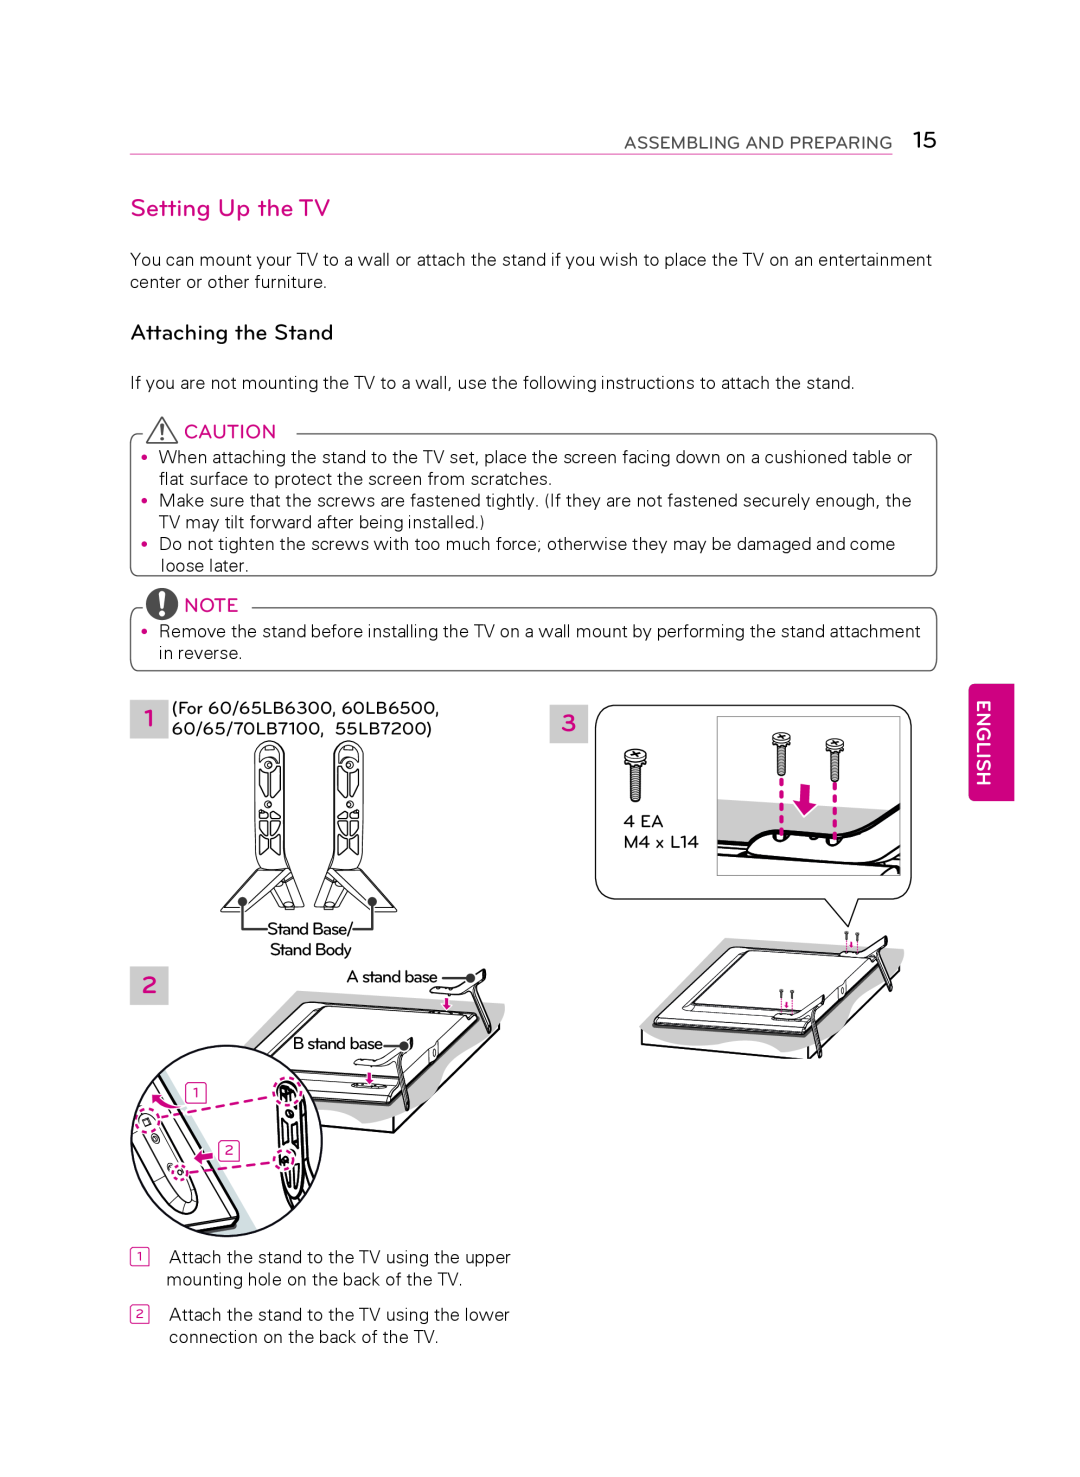 LG Electronics 50LB6300 owner manual Setting Up the TV, English, Attaching the Stand, Assembling And Preparing 